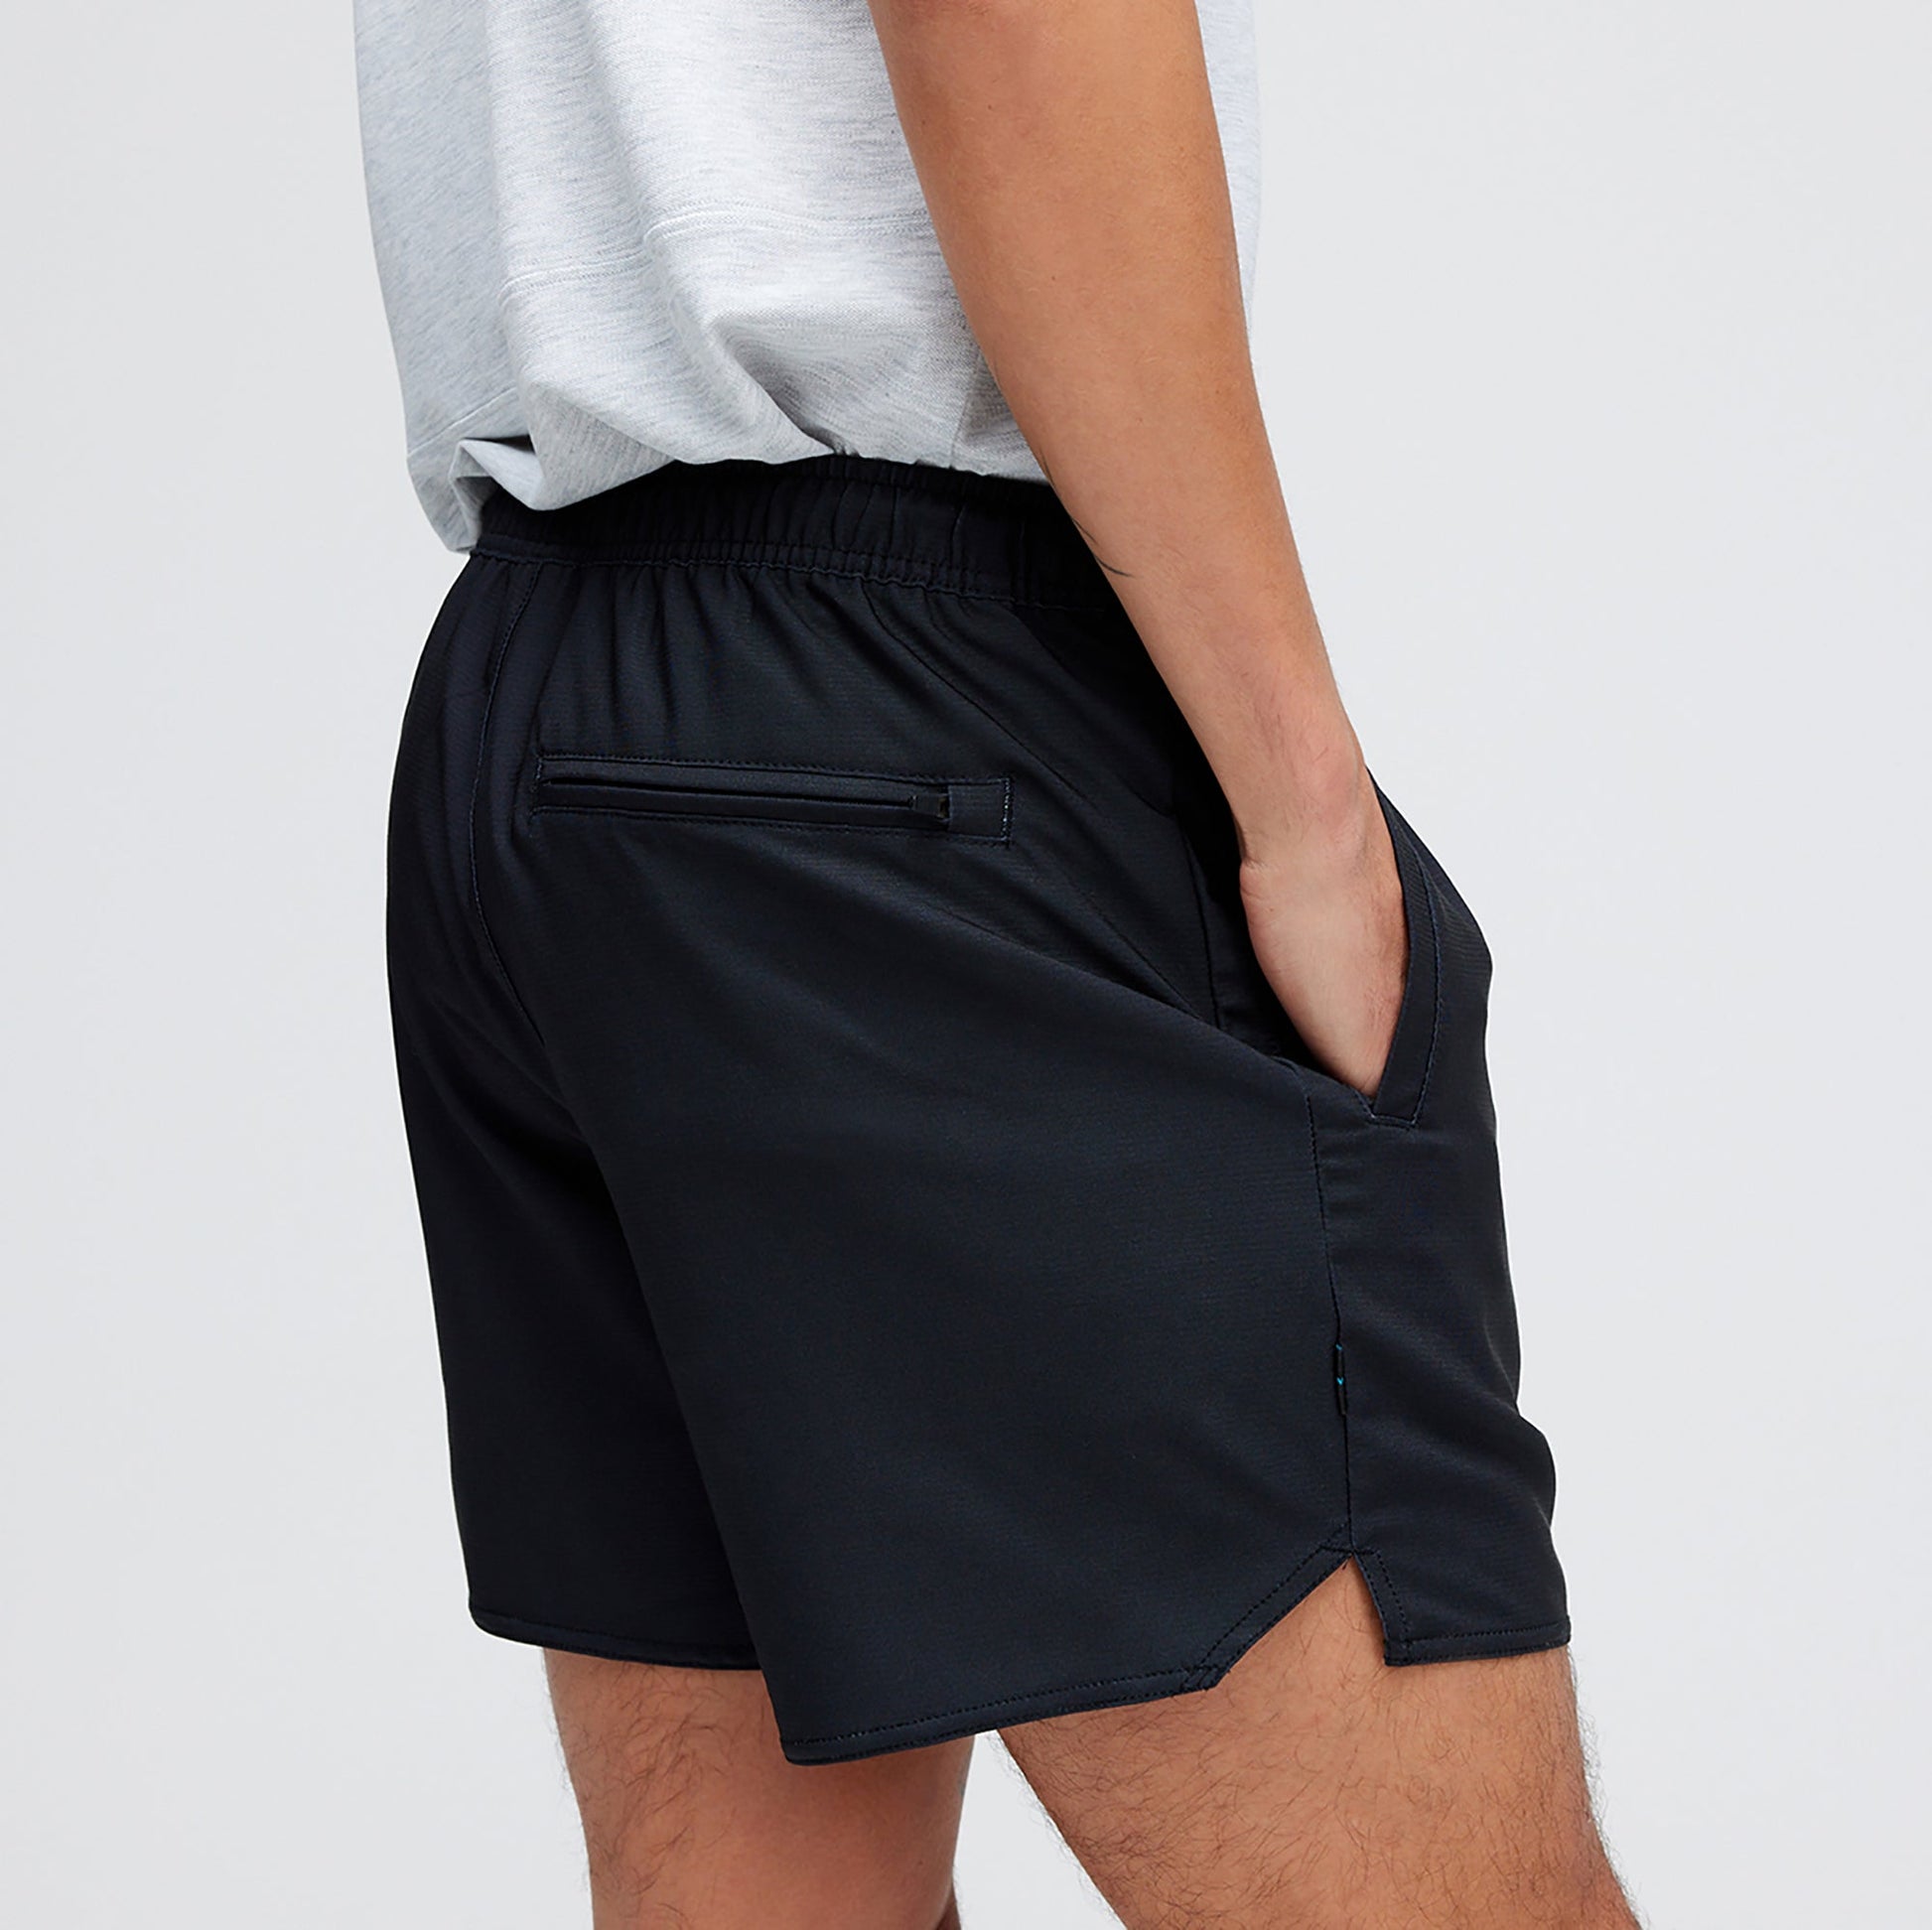 Stance Complex Athletic Short 5" Anthracite |model